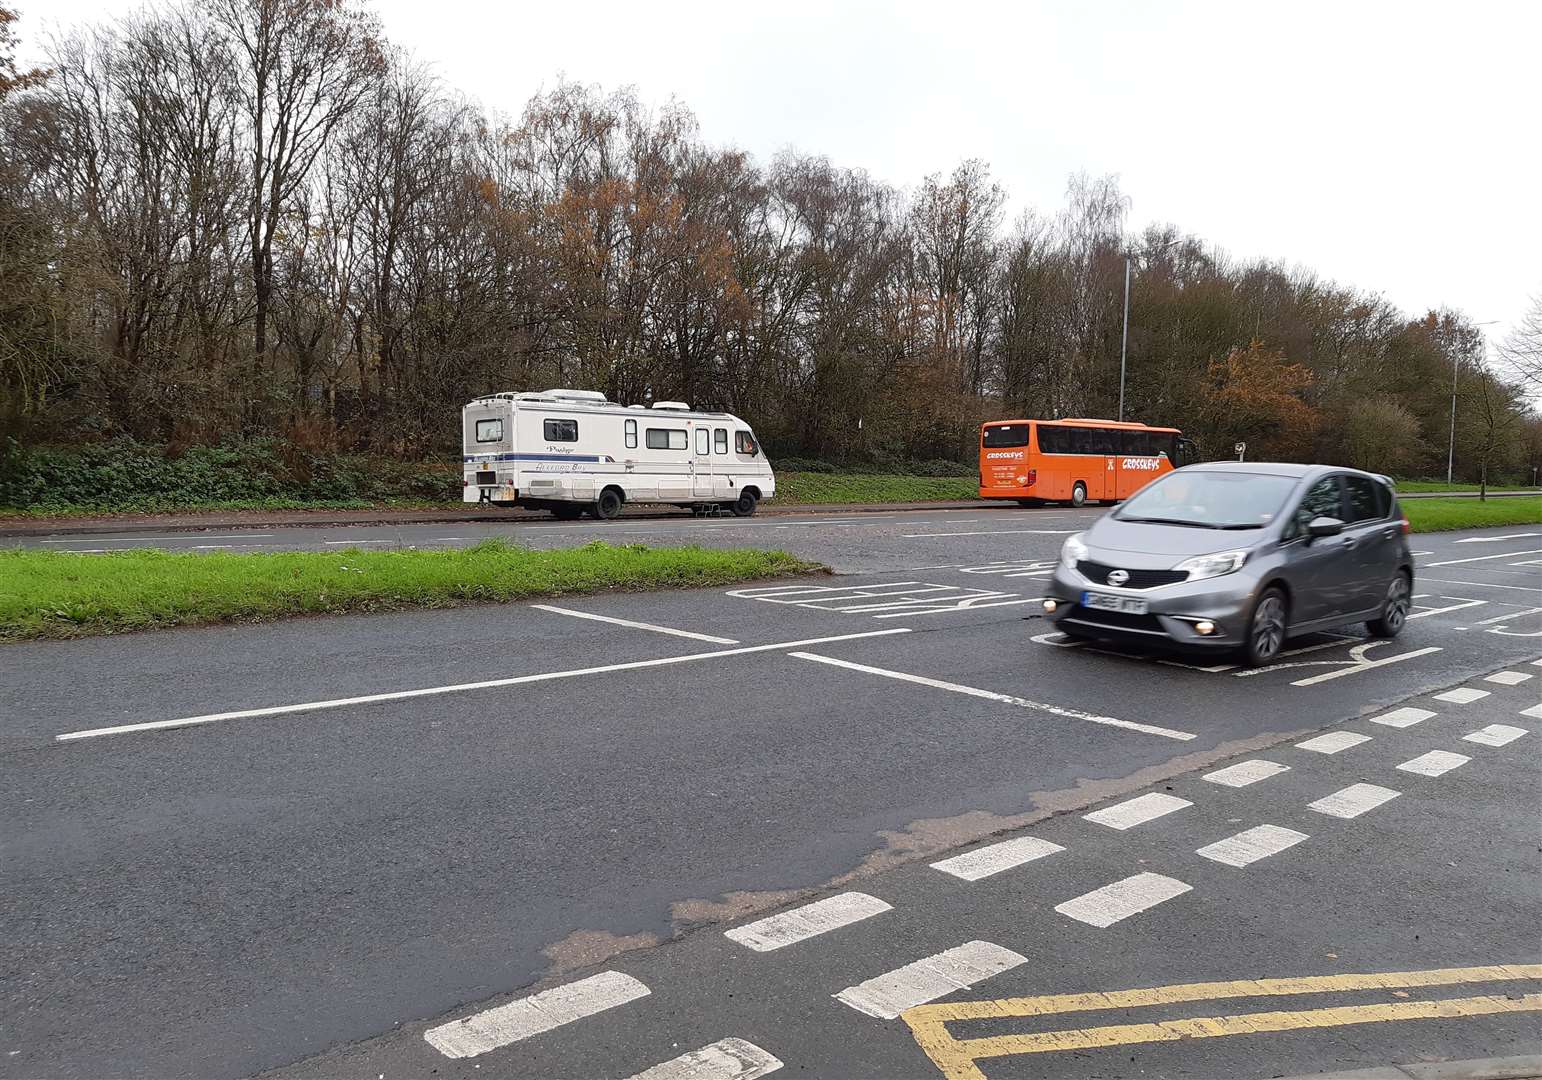 The motorhome is on the busy Simone Weil Avenue close to Bybrook Sainsbury's